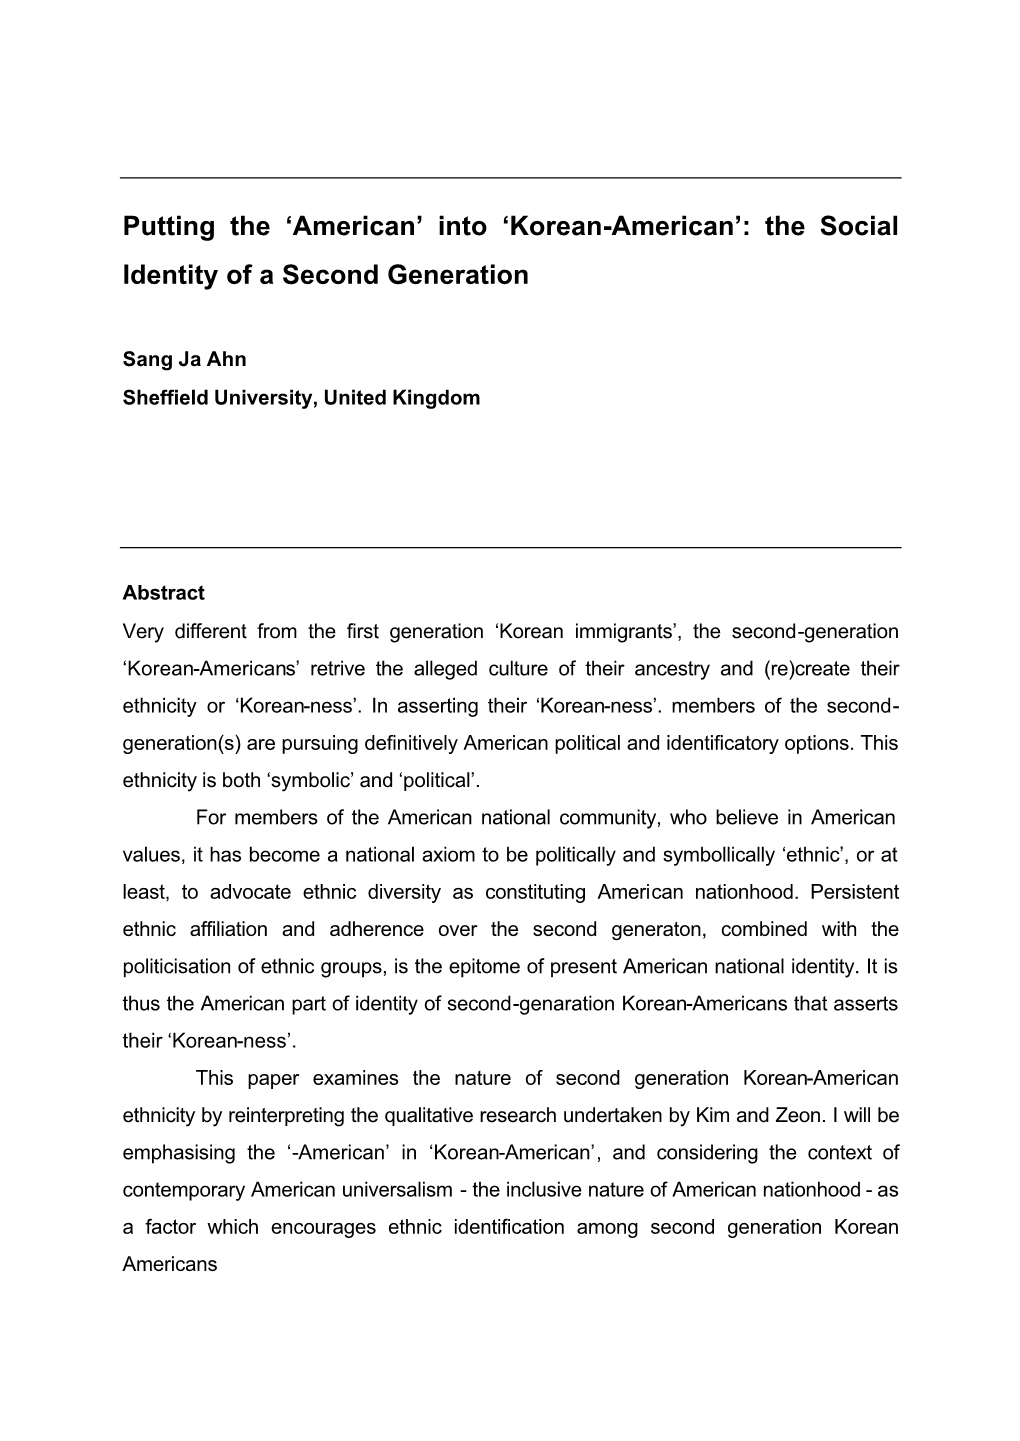 Into 'Korean-American': the Social Identity of a Second Generation